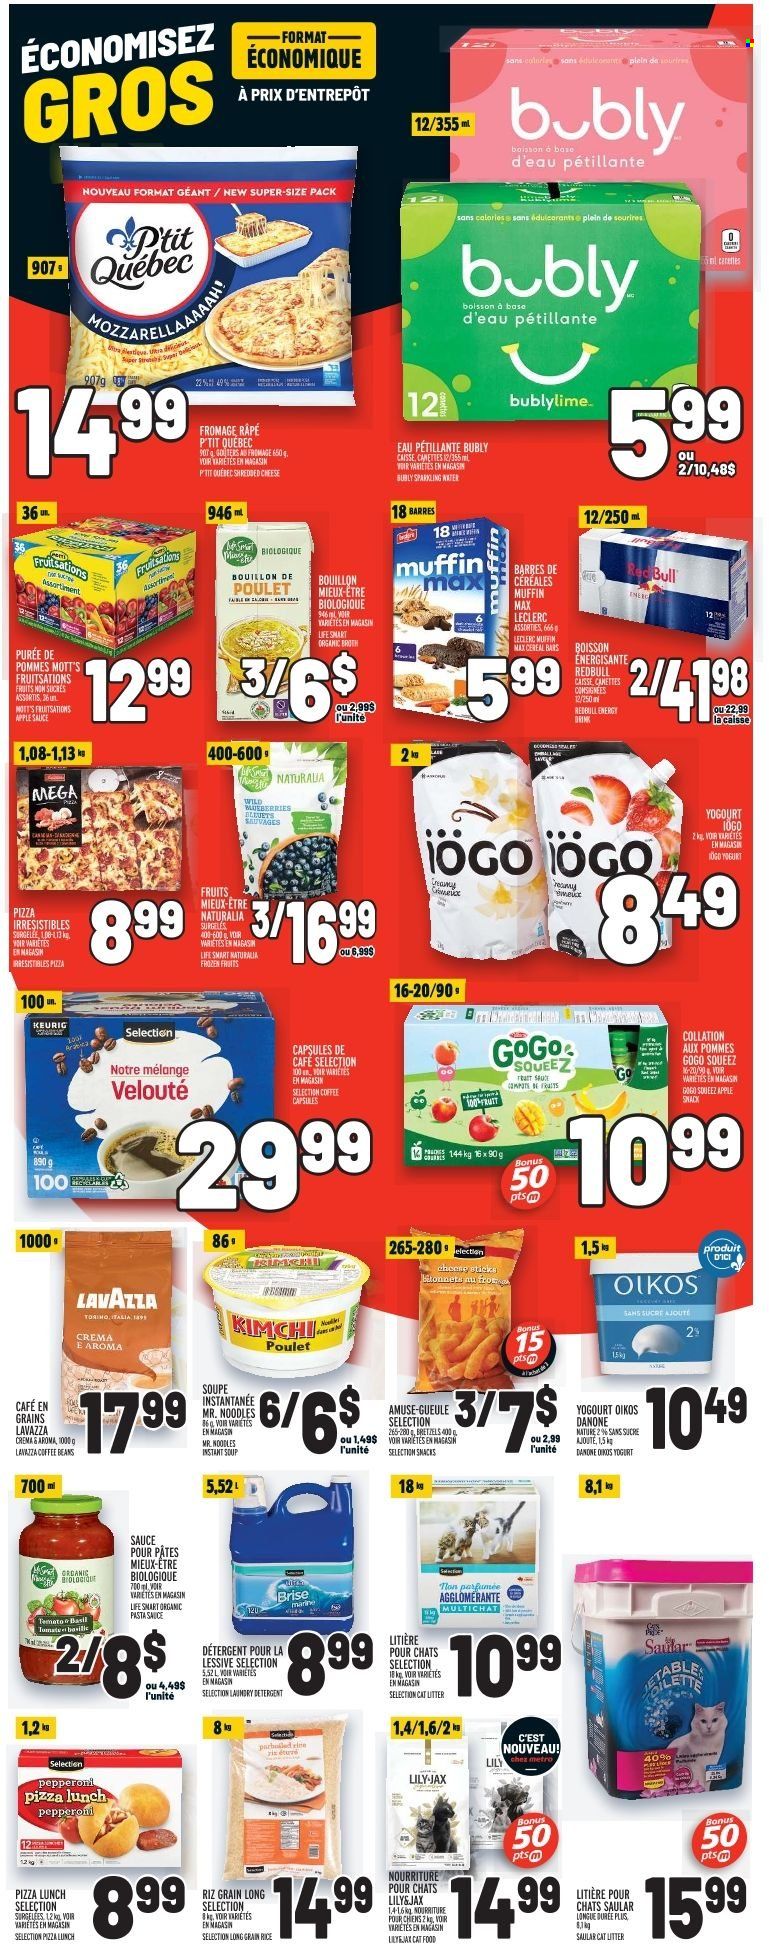 thumbnail - Metro Flyer - November 24, 2022 - November 30, 2022 - Sales products - muffin, blueberries, Mott's, pizza, pasta sauce, condensed soup, soup, sauce, instant soup, pepperoni, shredded cheese, yoghurt, Oikos, cheese sticks, snack, cereal bar, bouillon, broth, cereals, miso, apple sauce, Red Bull, sparkling water, coffee beans, coffee capsules, Keurig, Lavazza, animal food, cat litter, cat food, detergent, Danone. Page 12.